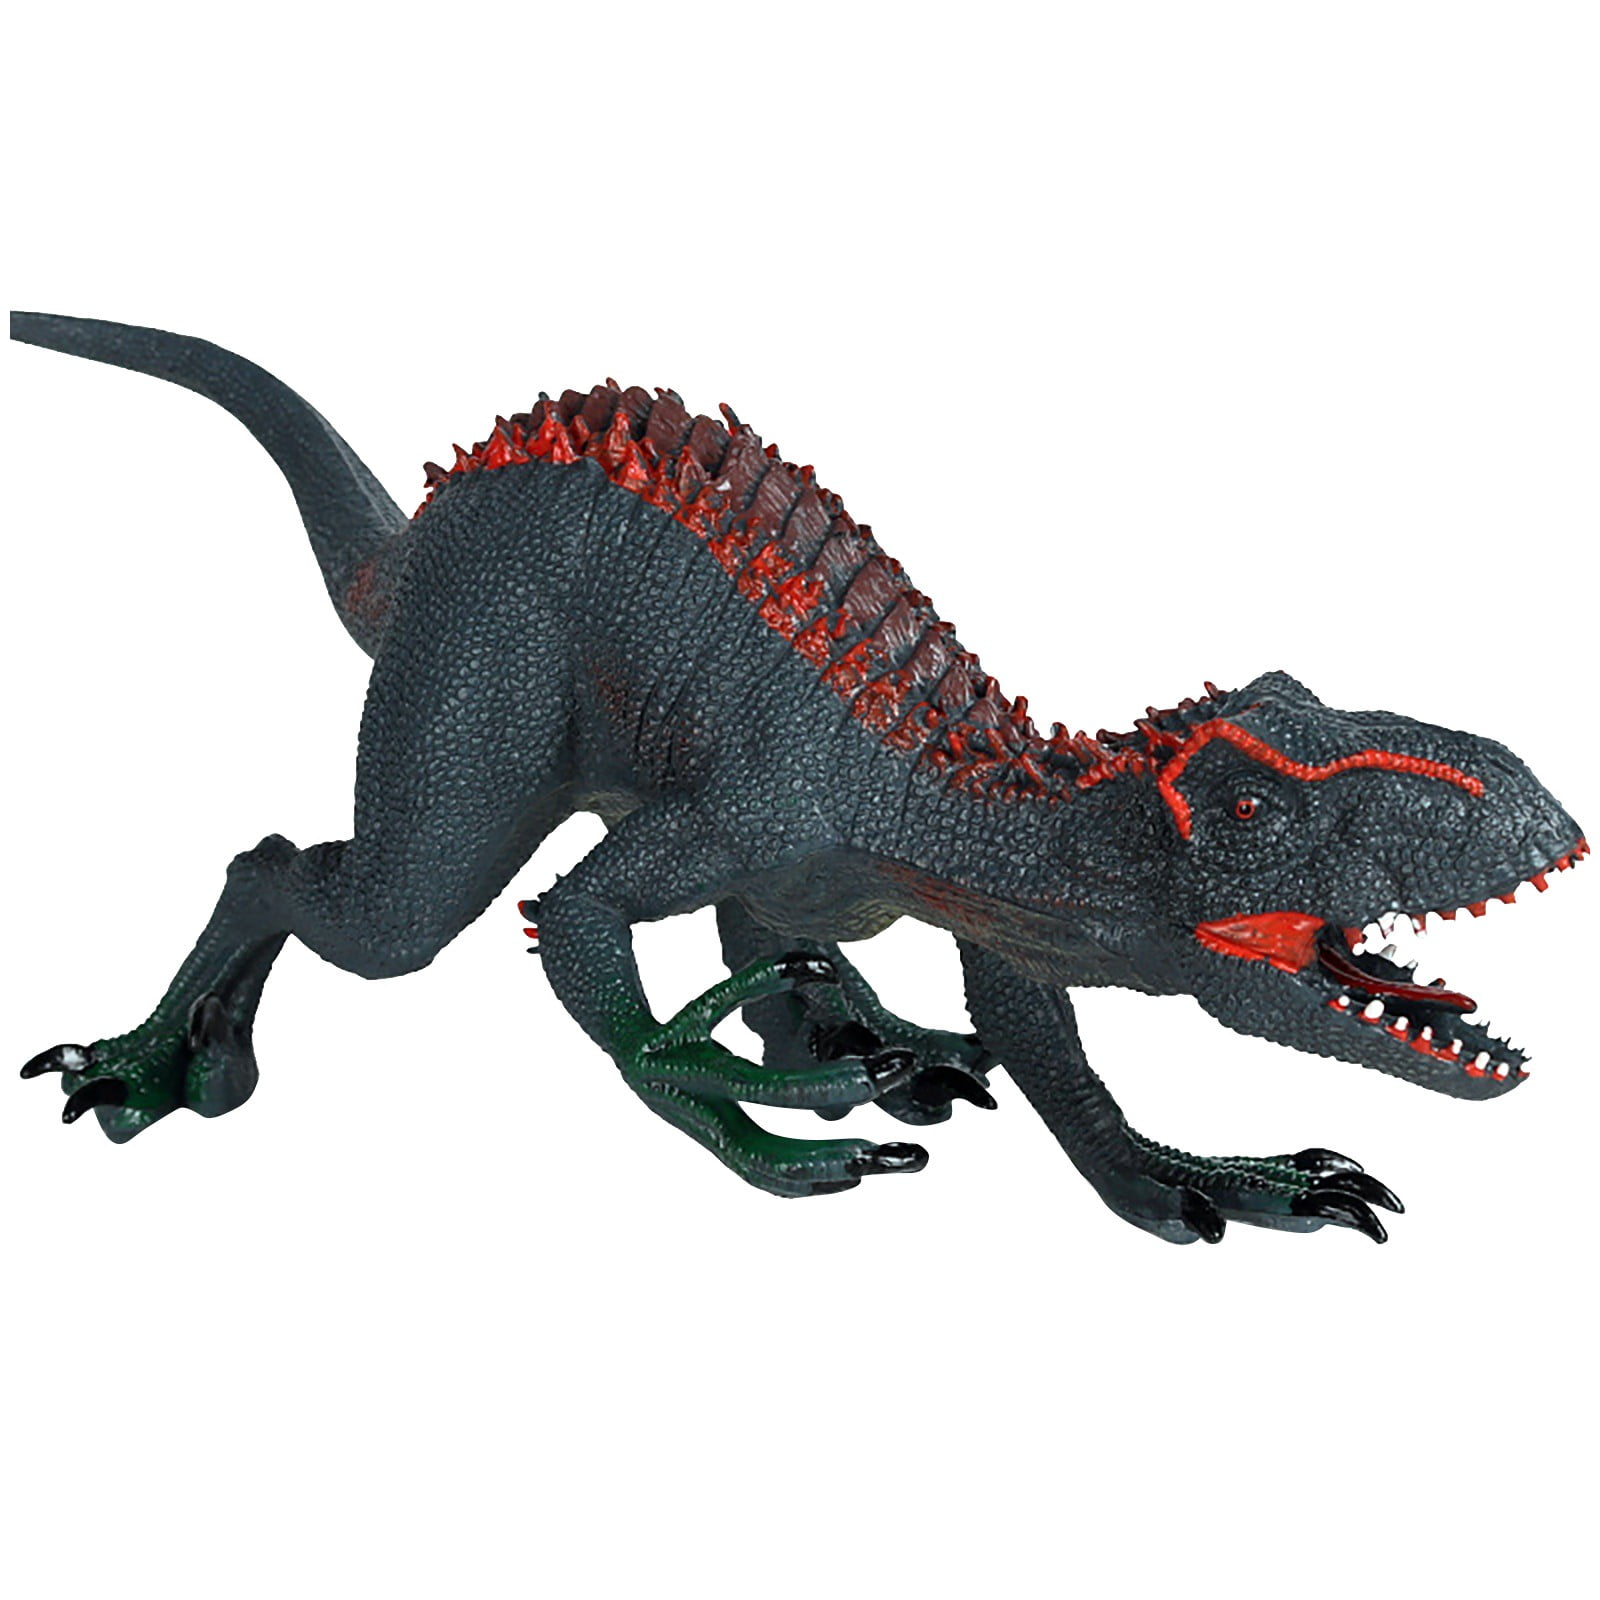 PVC Jurassic Dinosaur Carcass Toy Action Figure Animal Model Collection Gift 